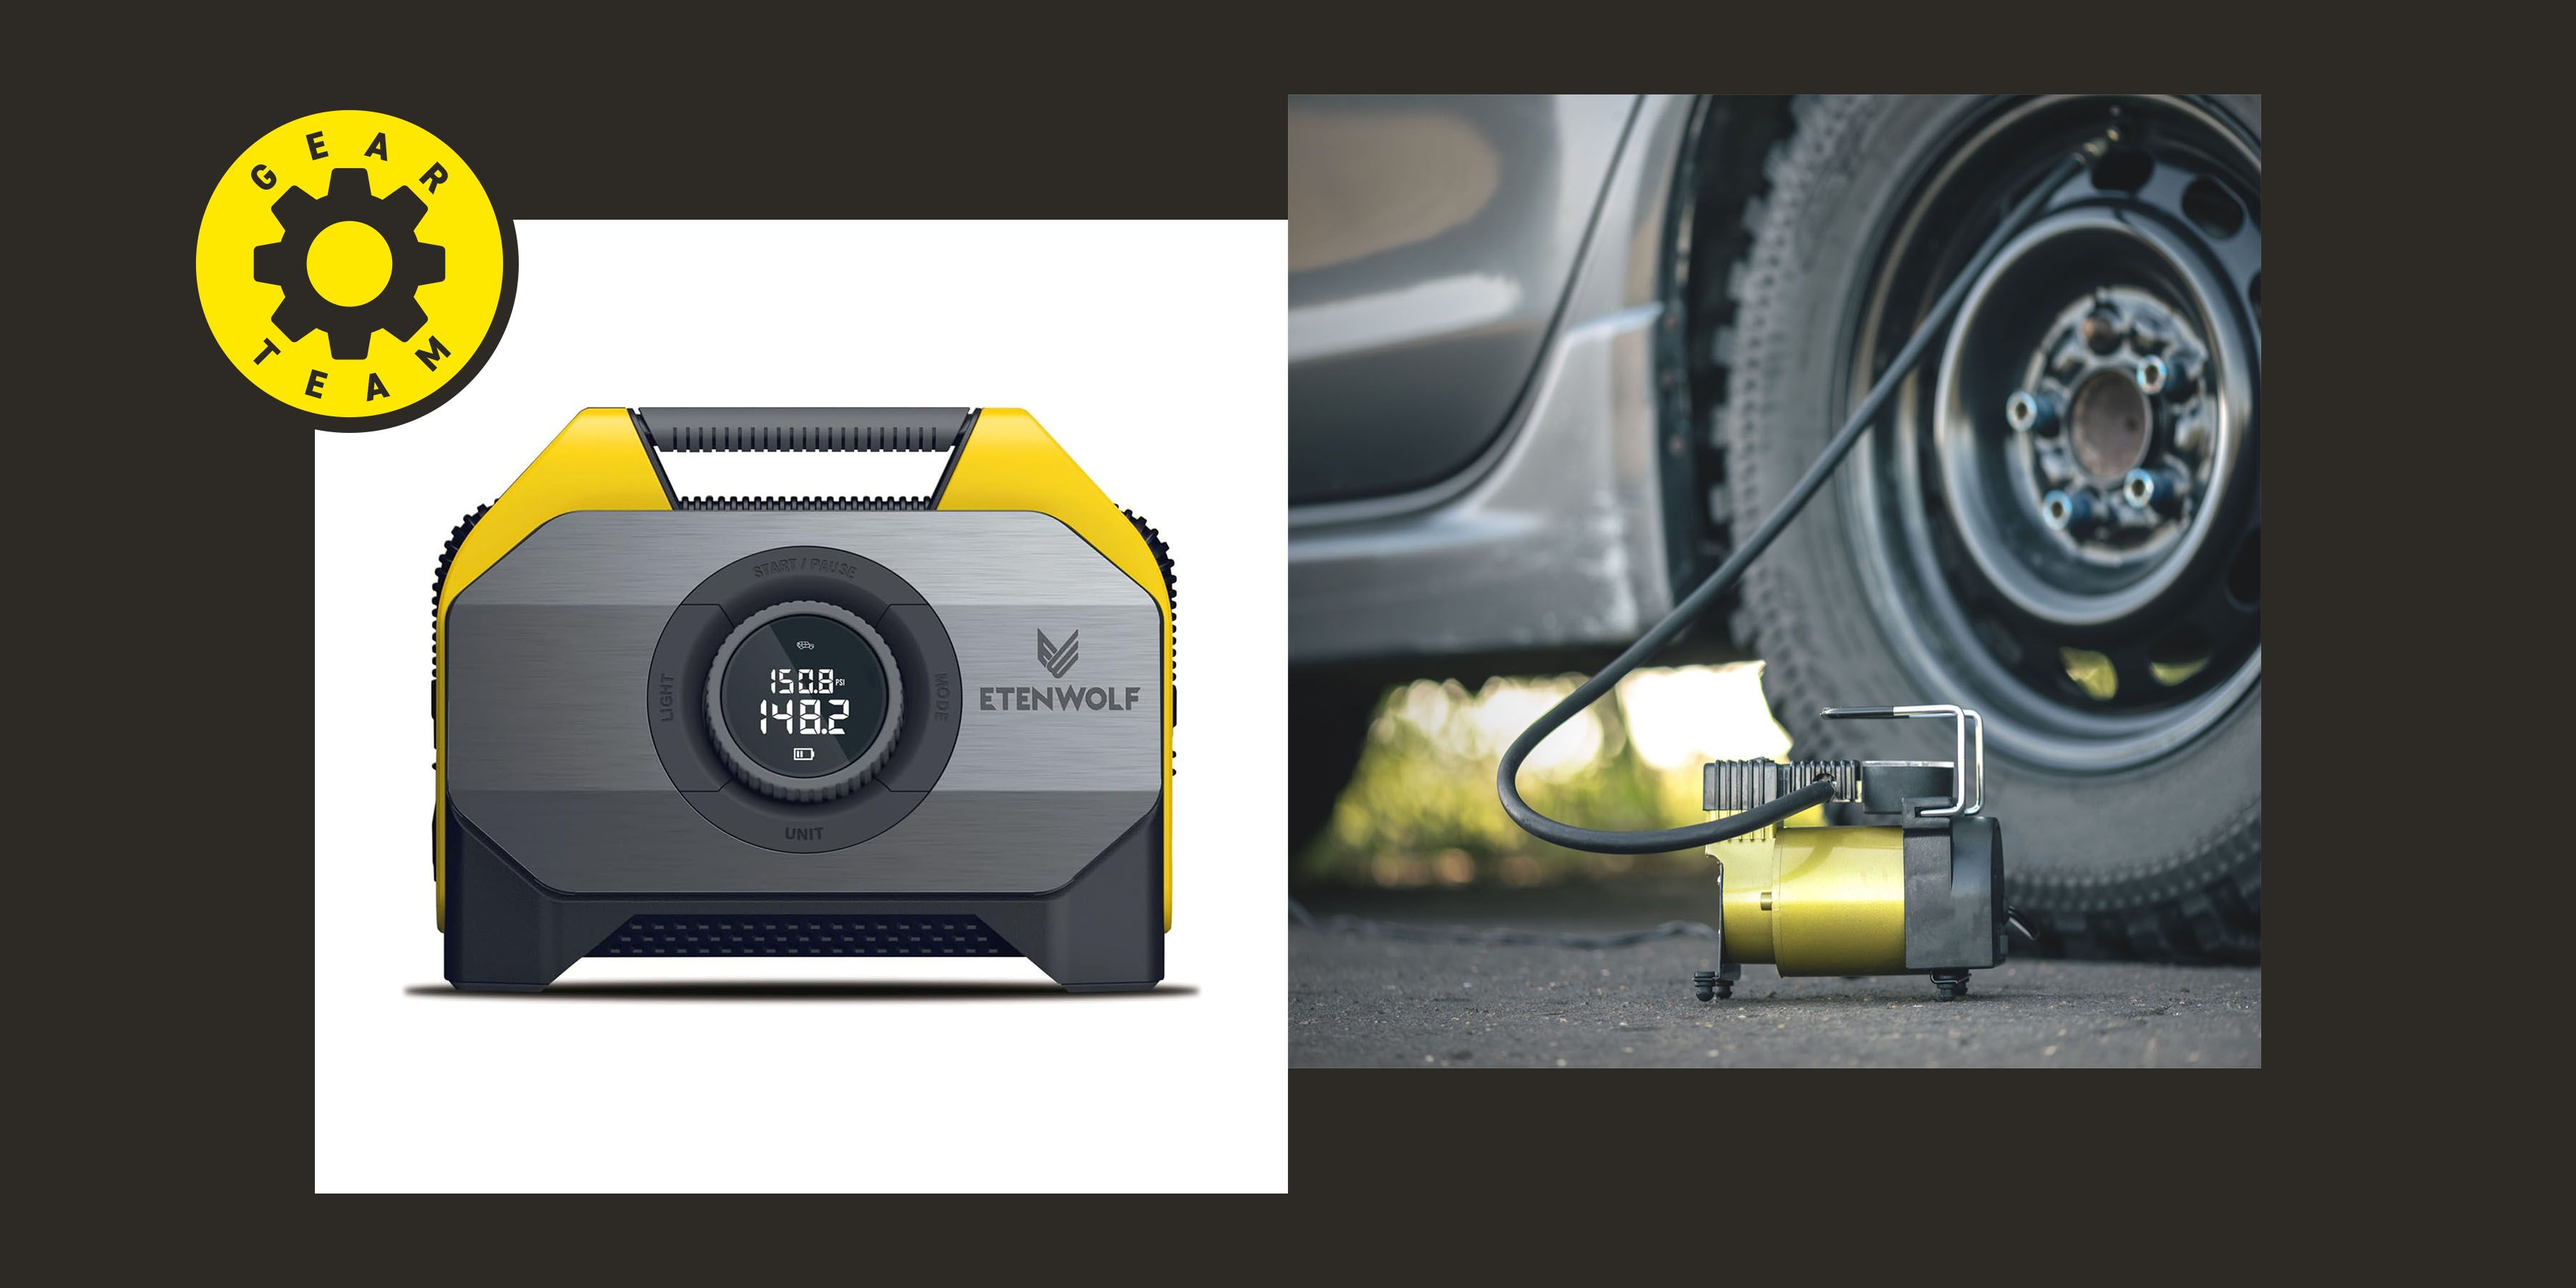 9 Best Portable Tire Inflators of 2023, Tested by Auto Experts